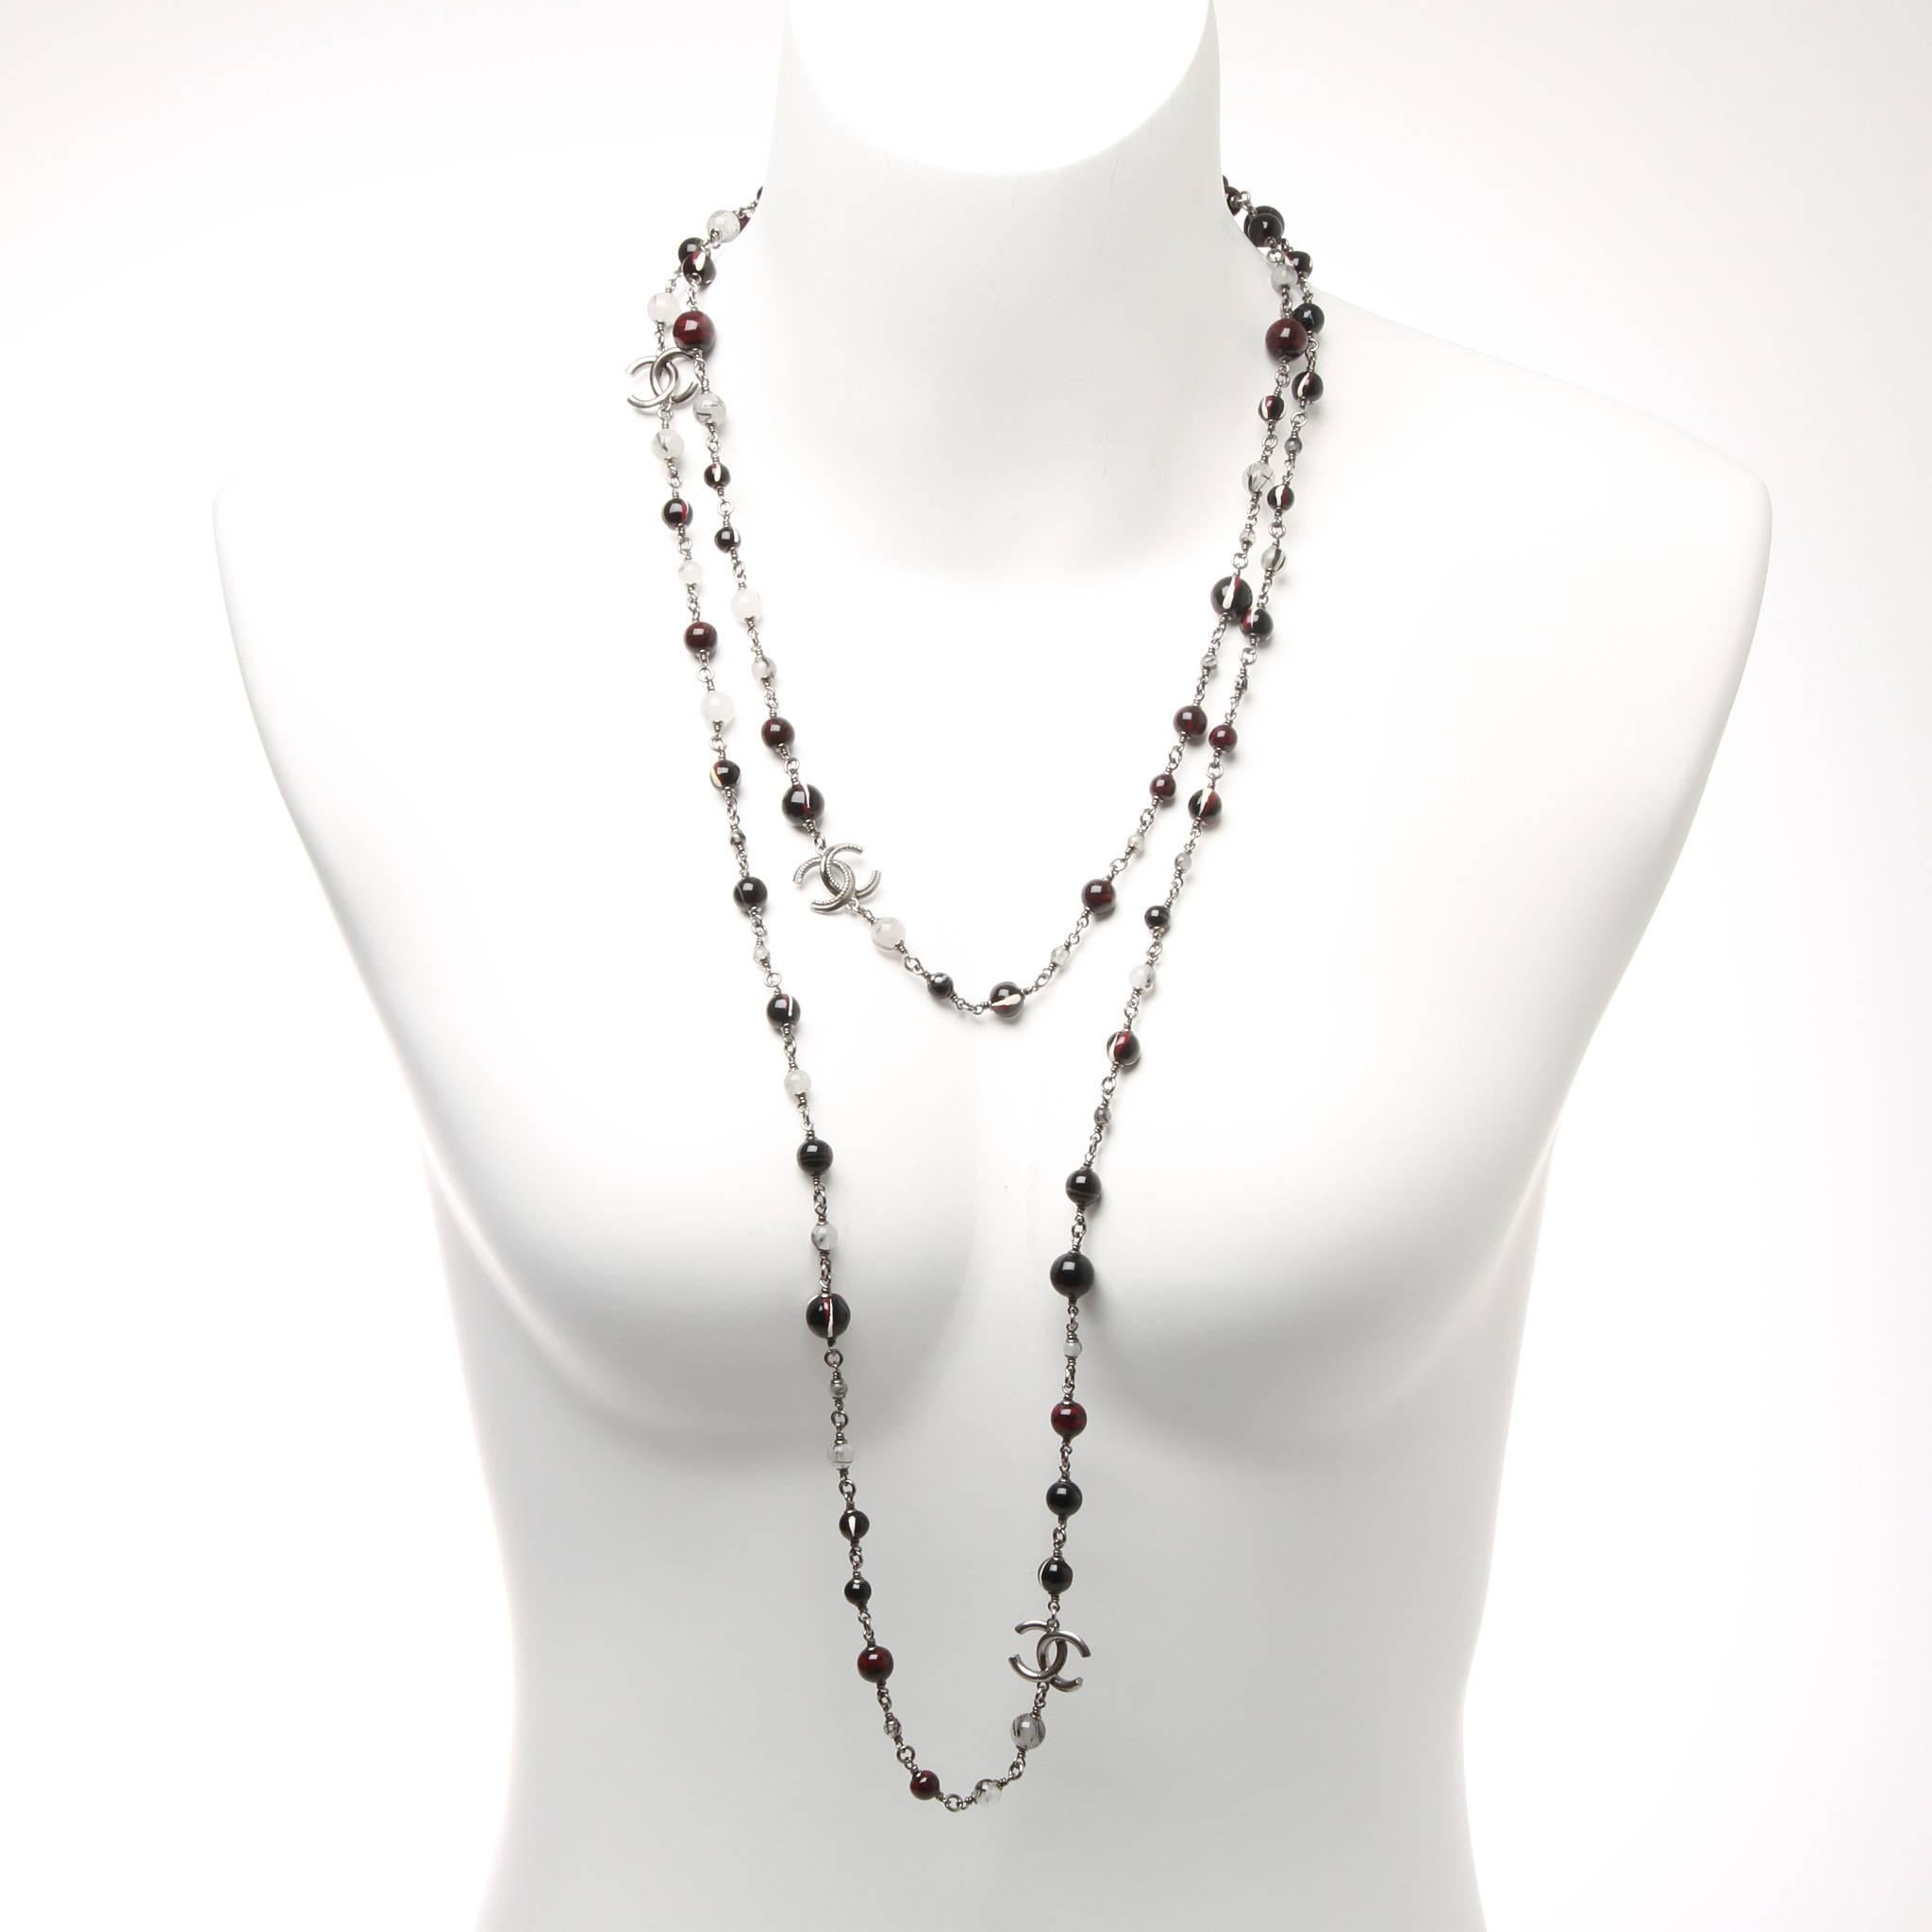 Chanel long necklace formed of black, red, white a purple marbled beads and fine silver wire. Featuring intermittent CC charms. 

Stamp 11 A